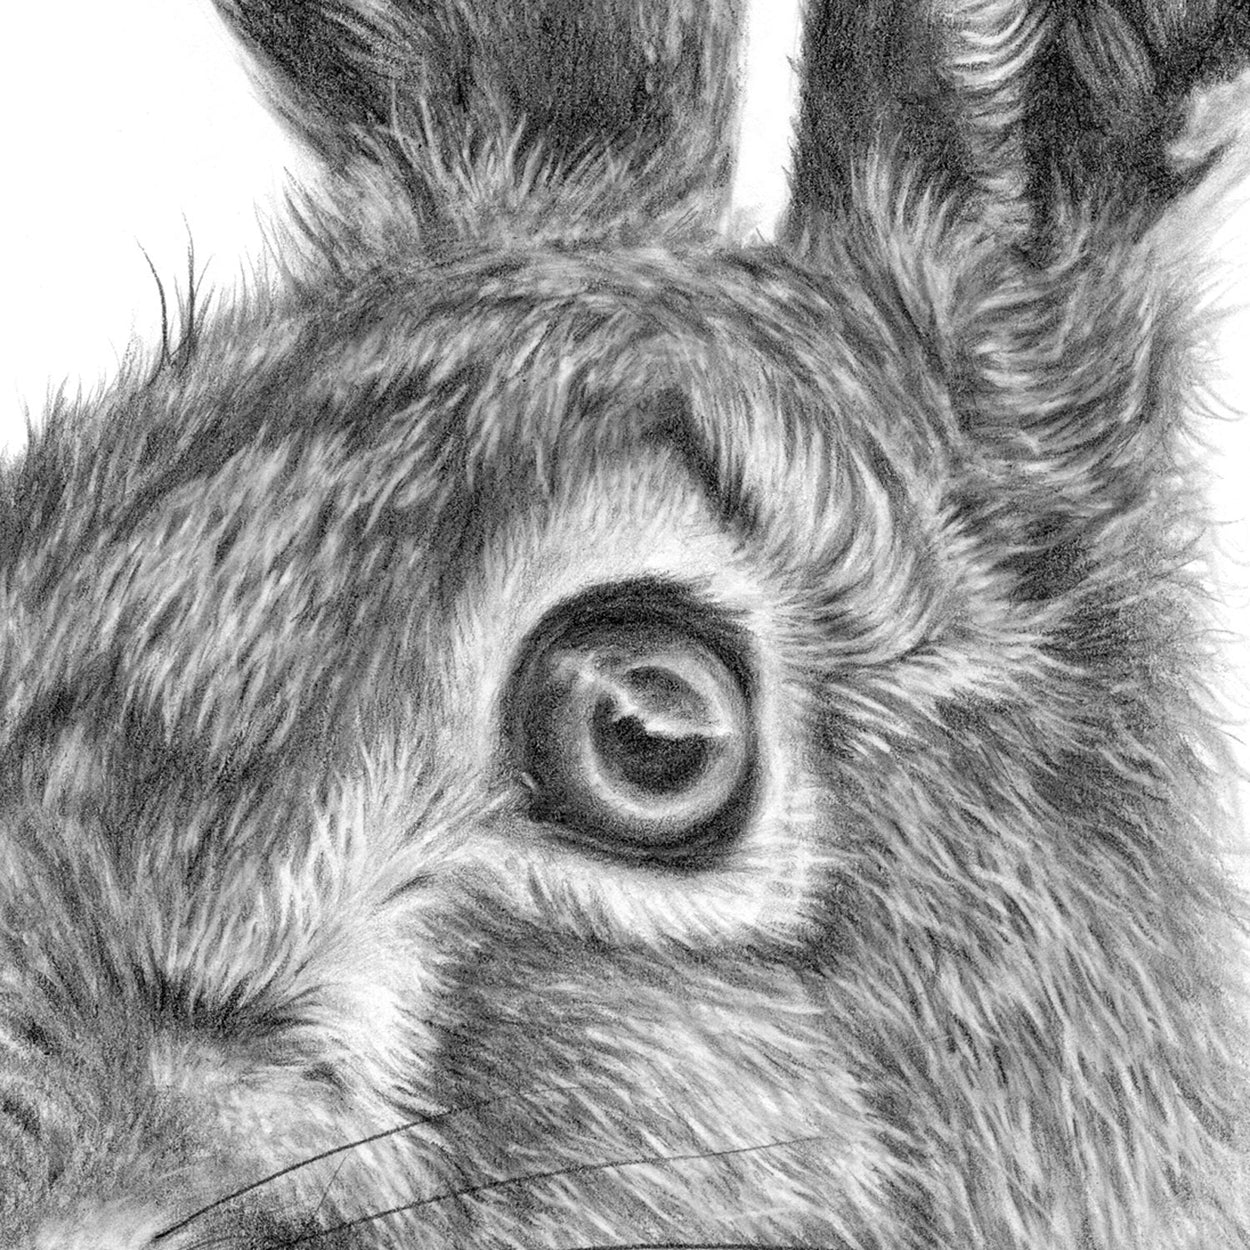 Hare Drawing Close-up 1 - The Thriving Wild - Jill Dimond